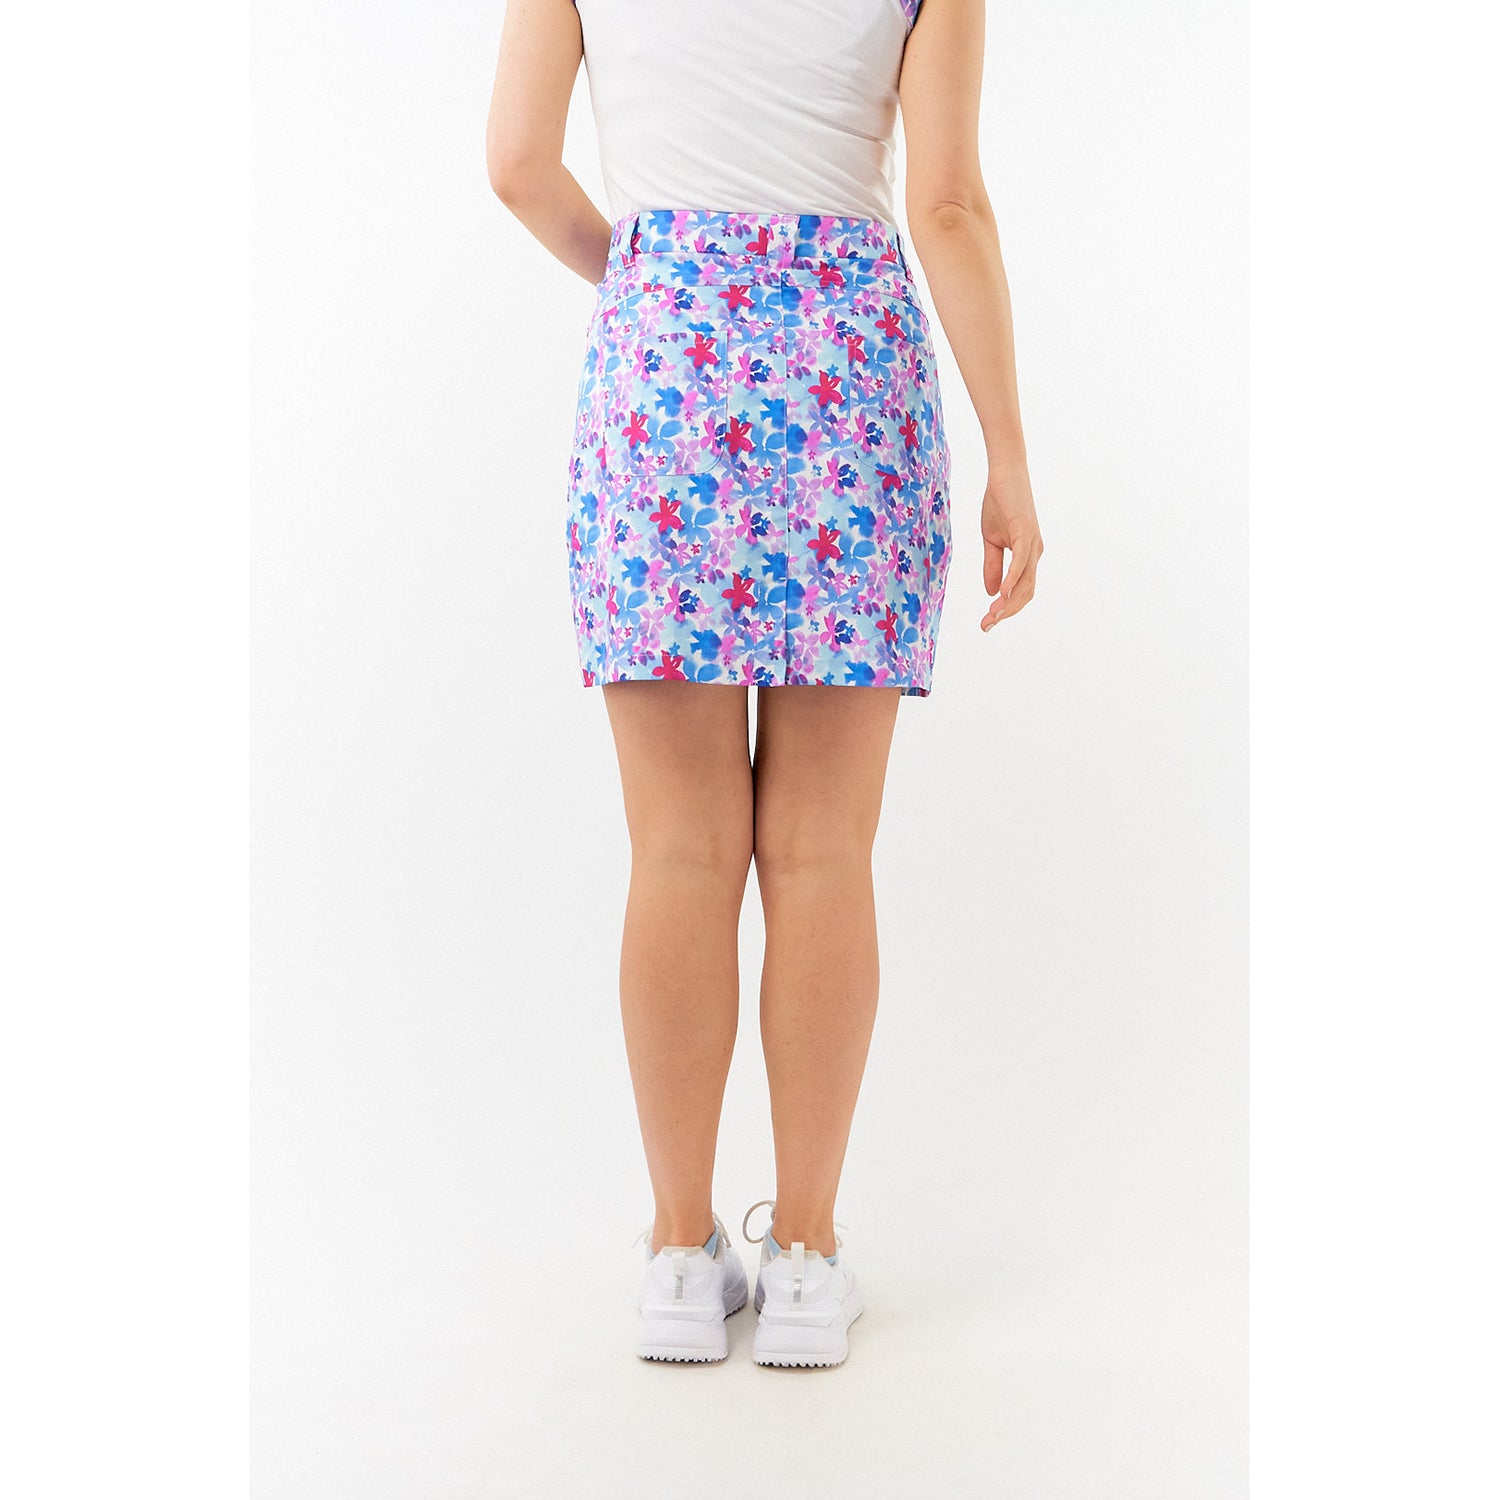 Pure Ladies Floral Print Golf Skort - Last One Size 16 Only Left